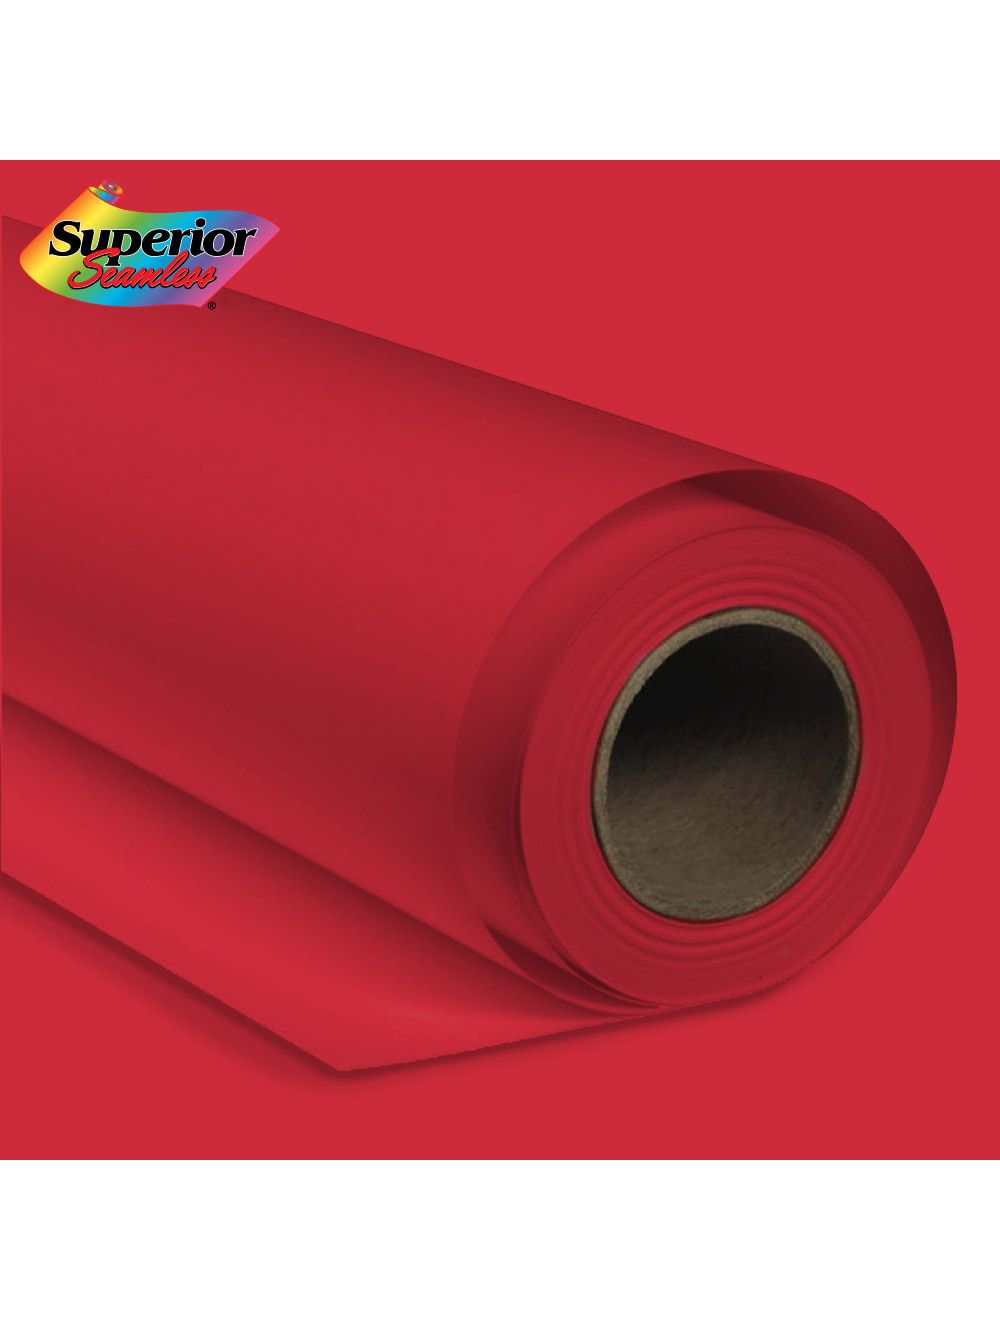 Superior Seamless 56 Scarlet Background Paper Roll Borge's Imaging